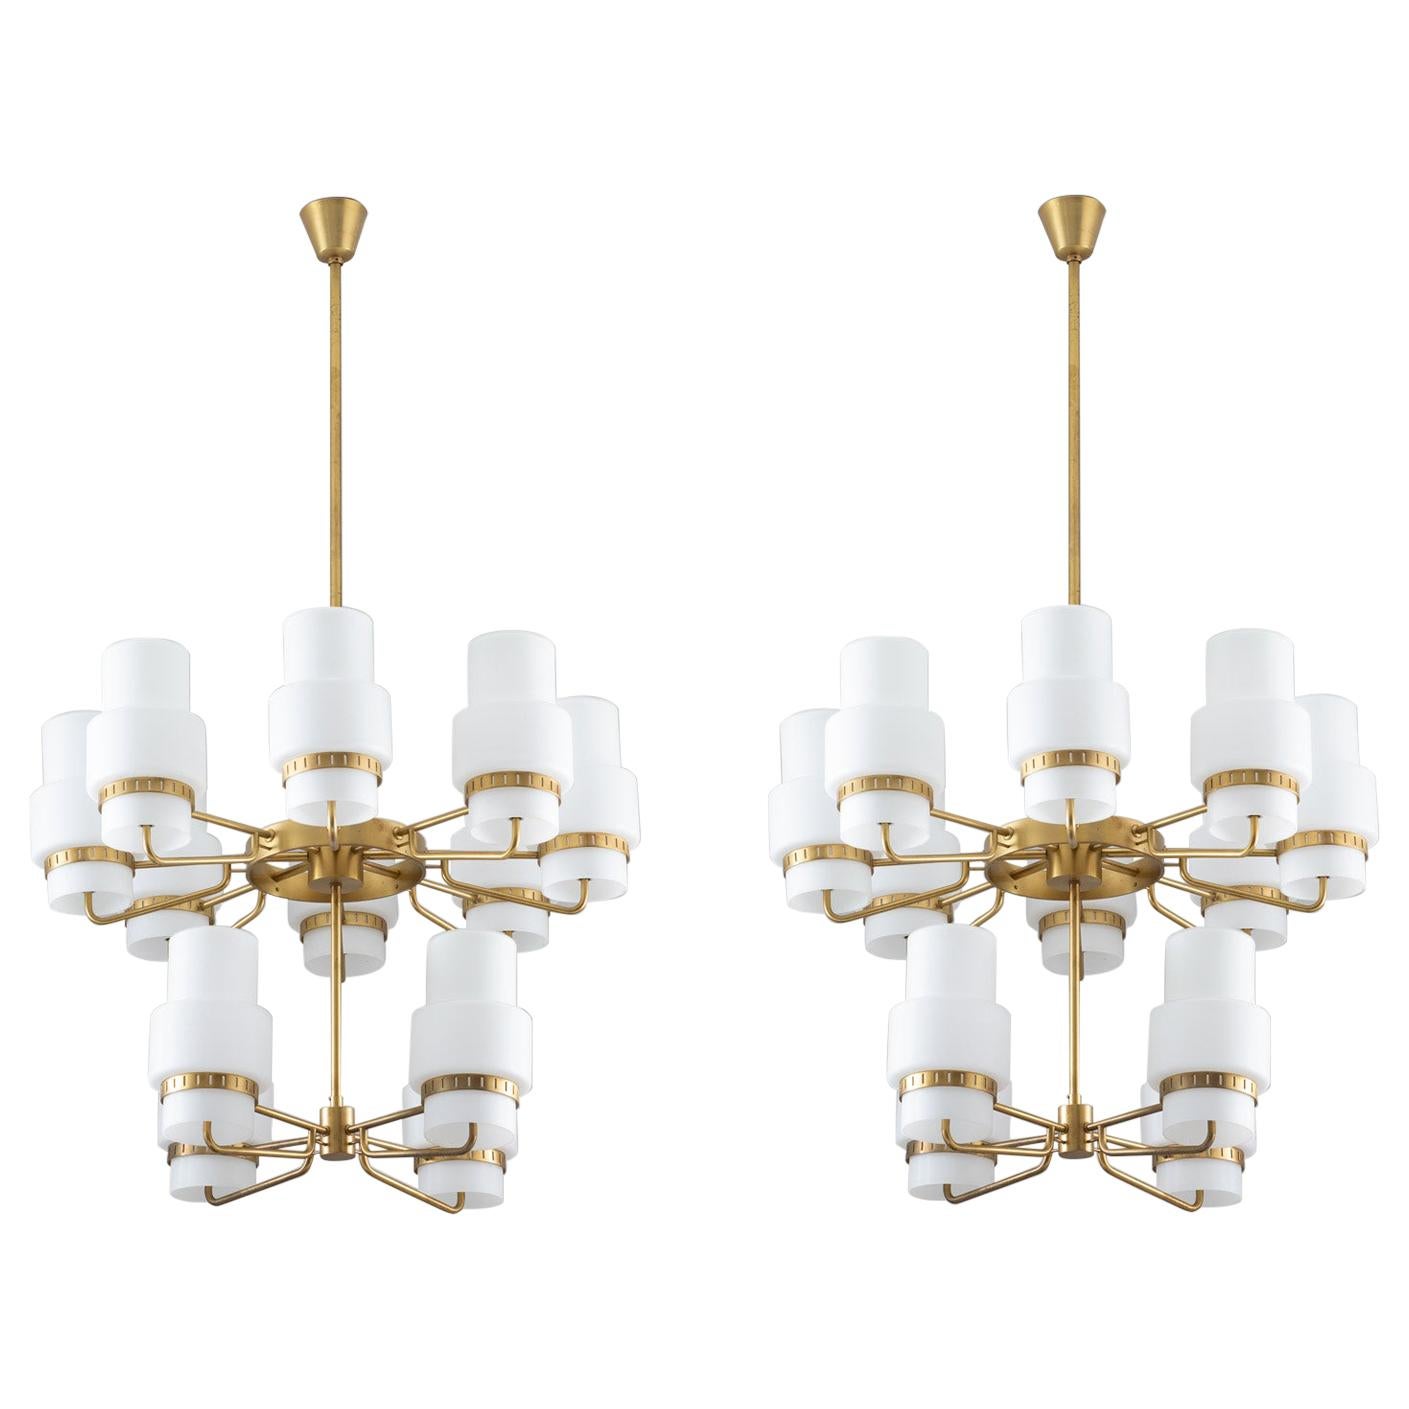 Large Swedish Midcentury Chandeliers in Brass and Frosted Opaline Glass